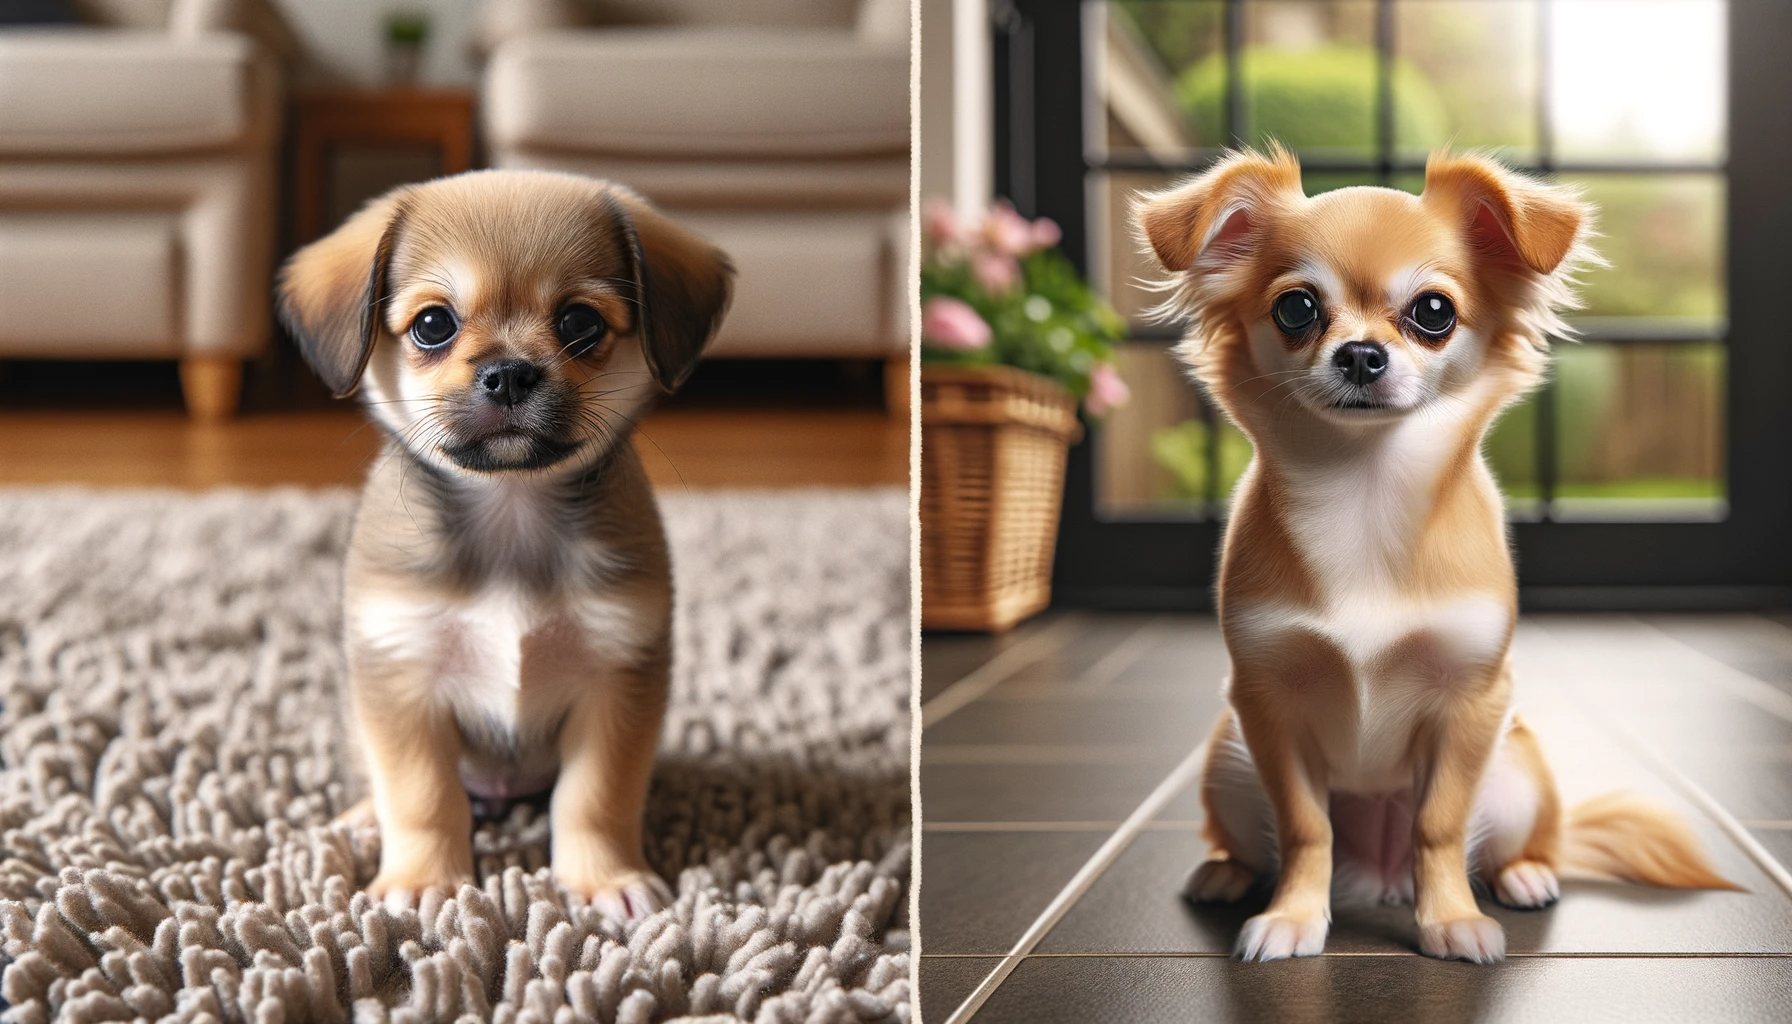 A split-screen comparison of a Labrahuahua puppy from a breeder and one from a shelter